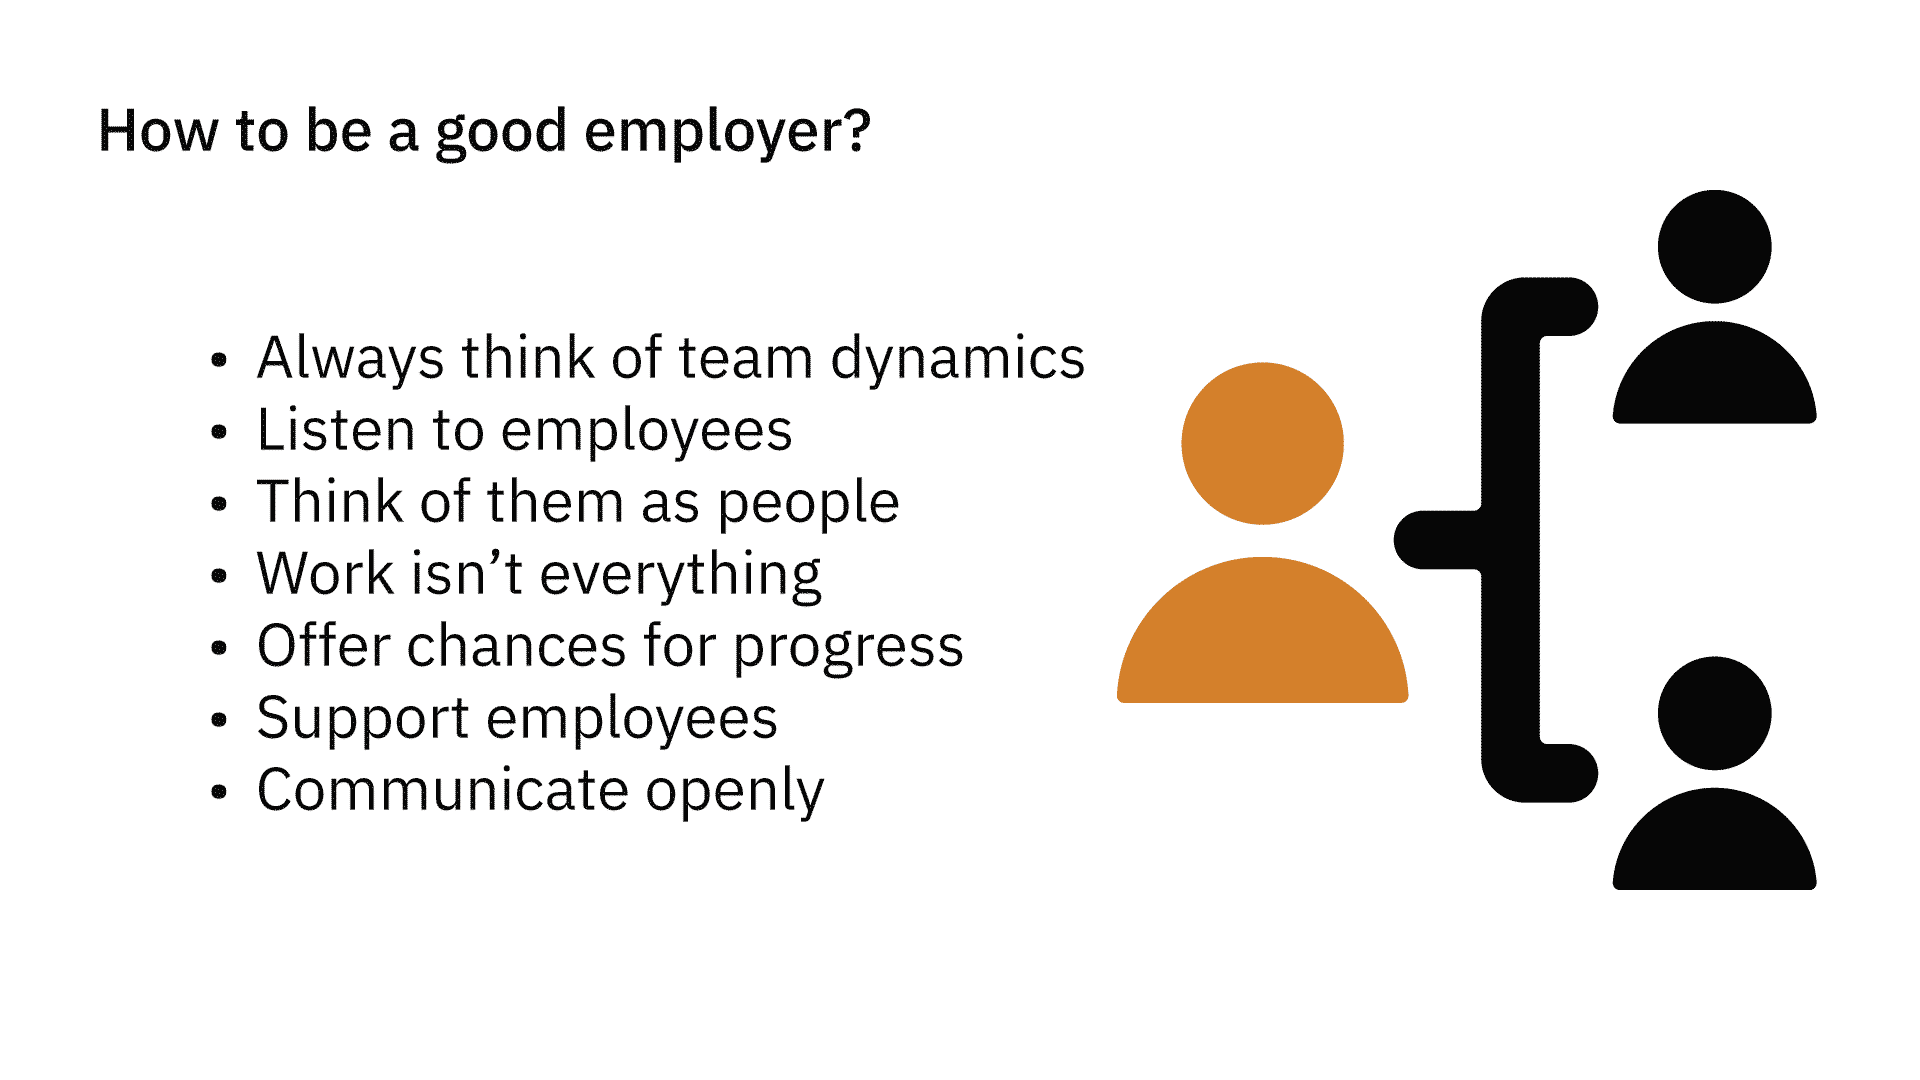 Infographic showing advice for being a good employer